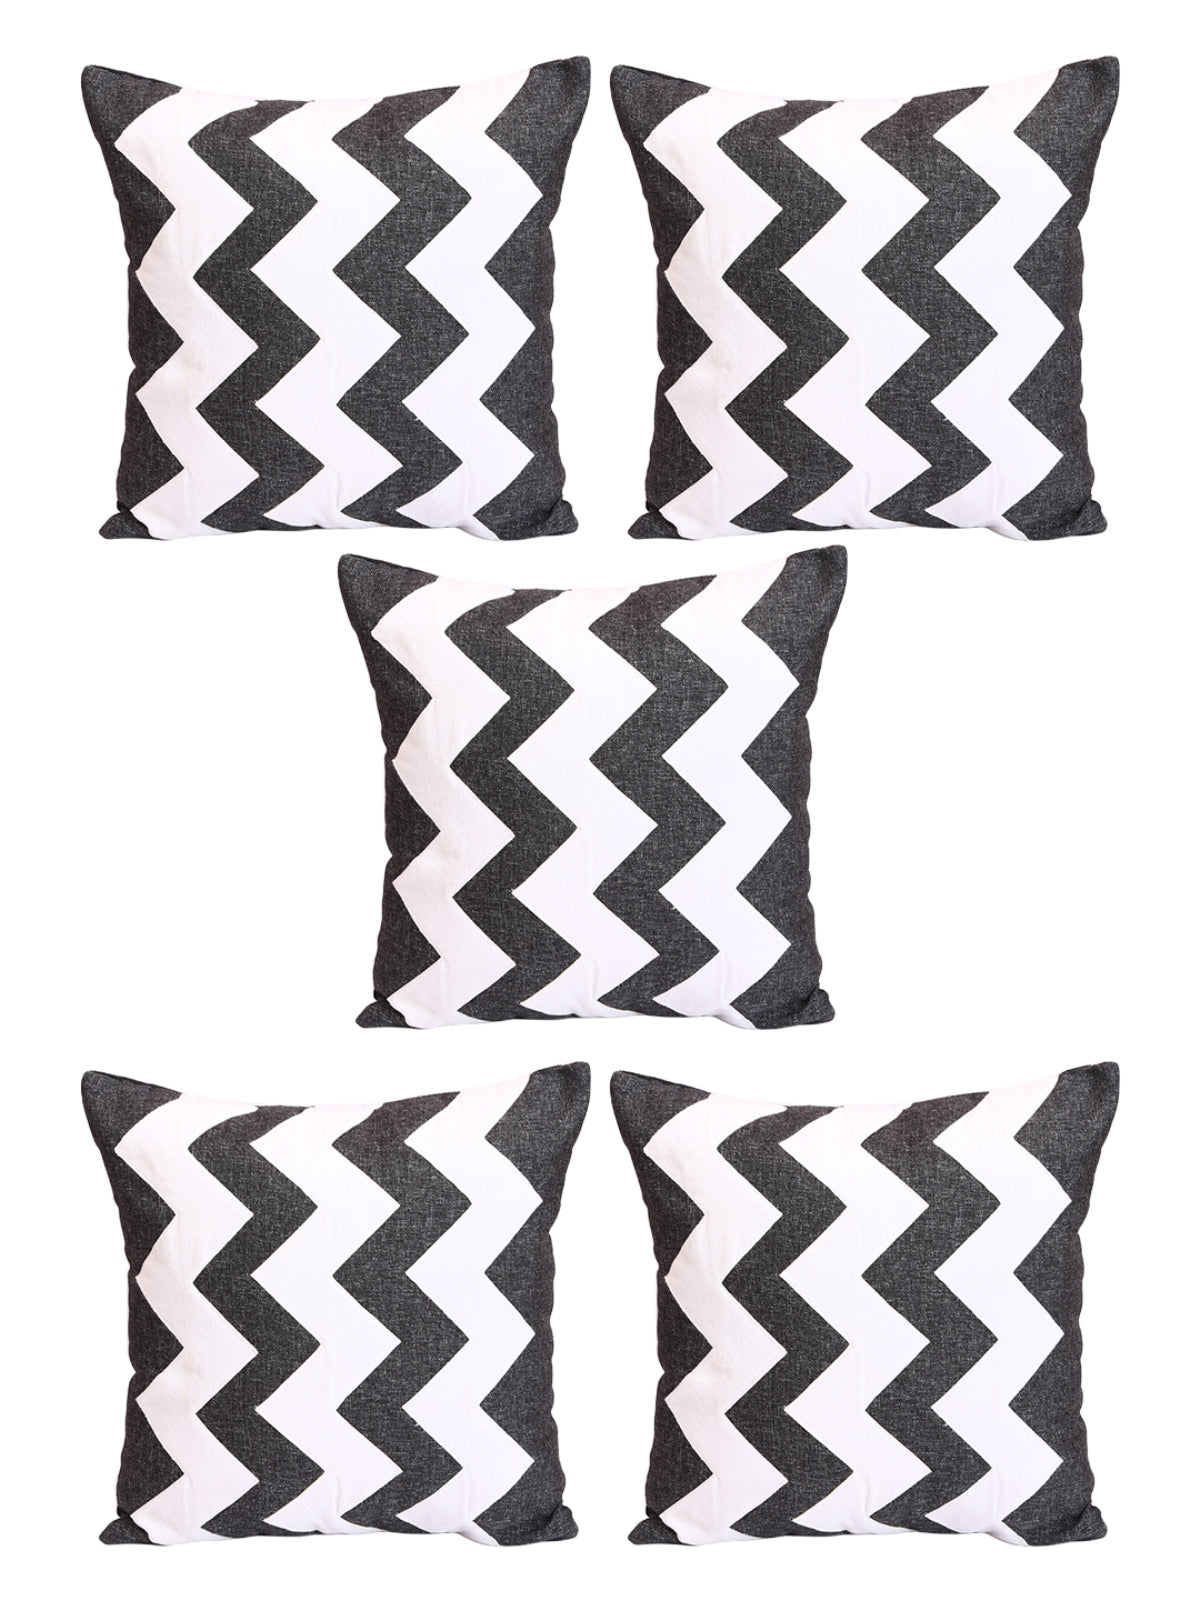 Black & White Set of 5 Polyester 16 Inch x 16 Inch Cushion Covers